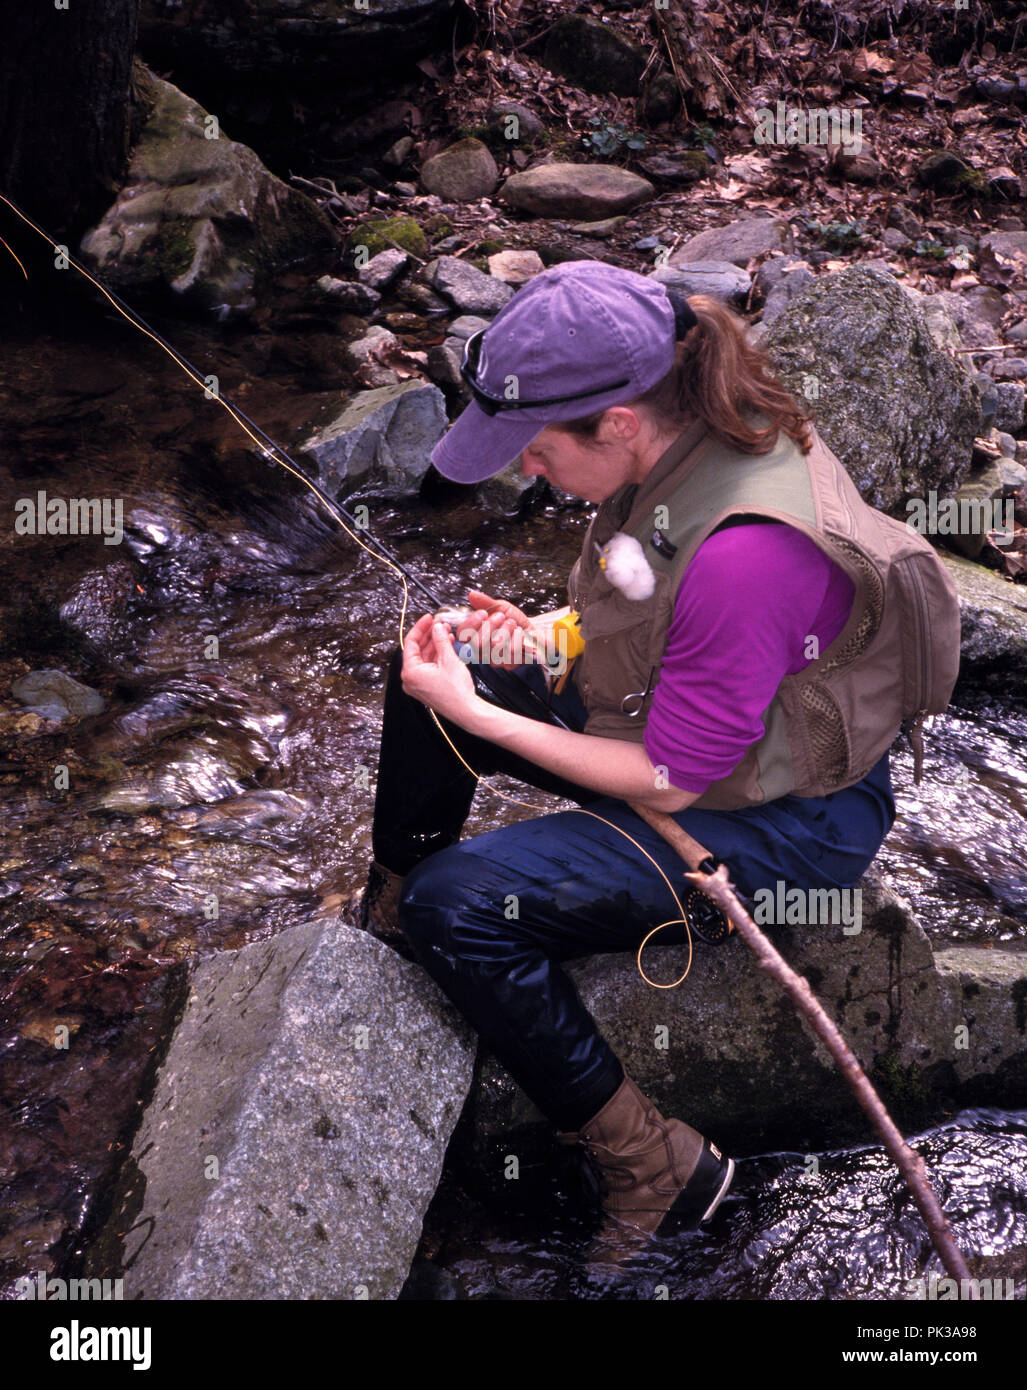 1flyfishing041201 -- Fly fishing for brook trout on the East Hawksbill Creek in the Shenandoah National Park, Virginia. Stock Photo